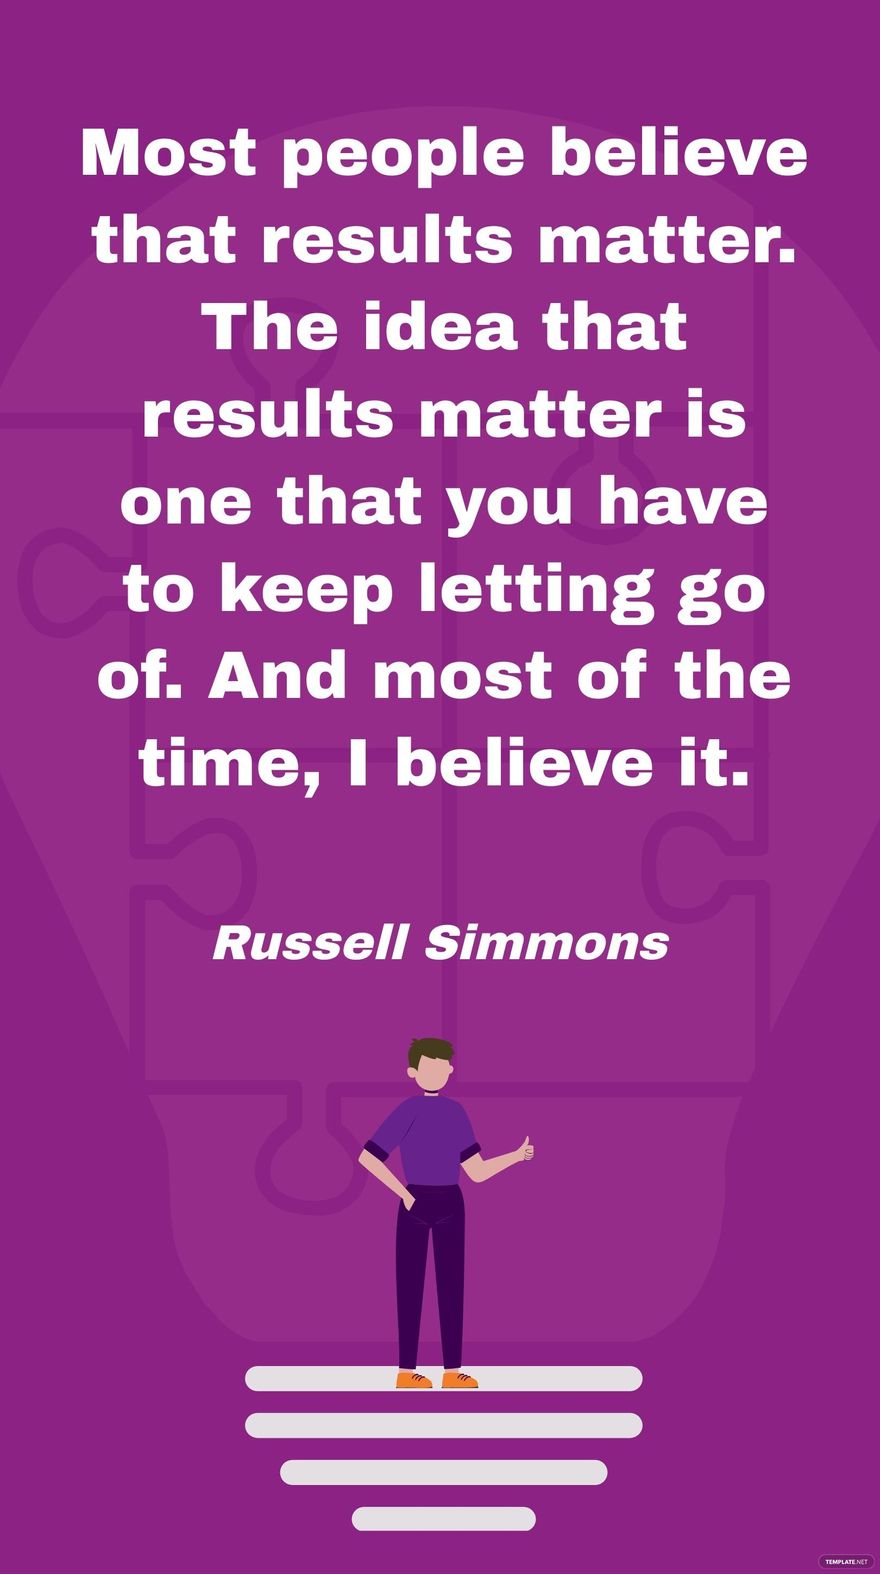 Russell Simmons - Most people believe that results matter. The idea that results matter is one that you have to keep letting go of. And most of the time, I believe it.